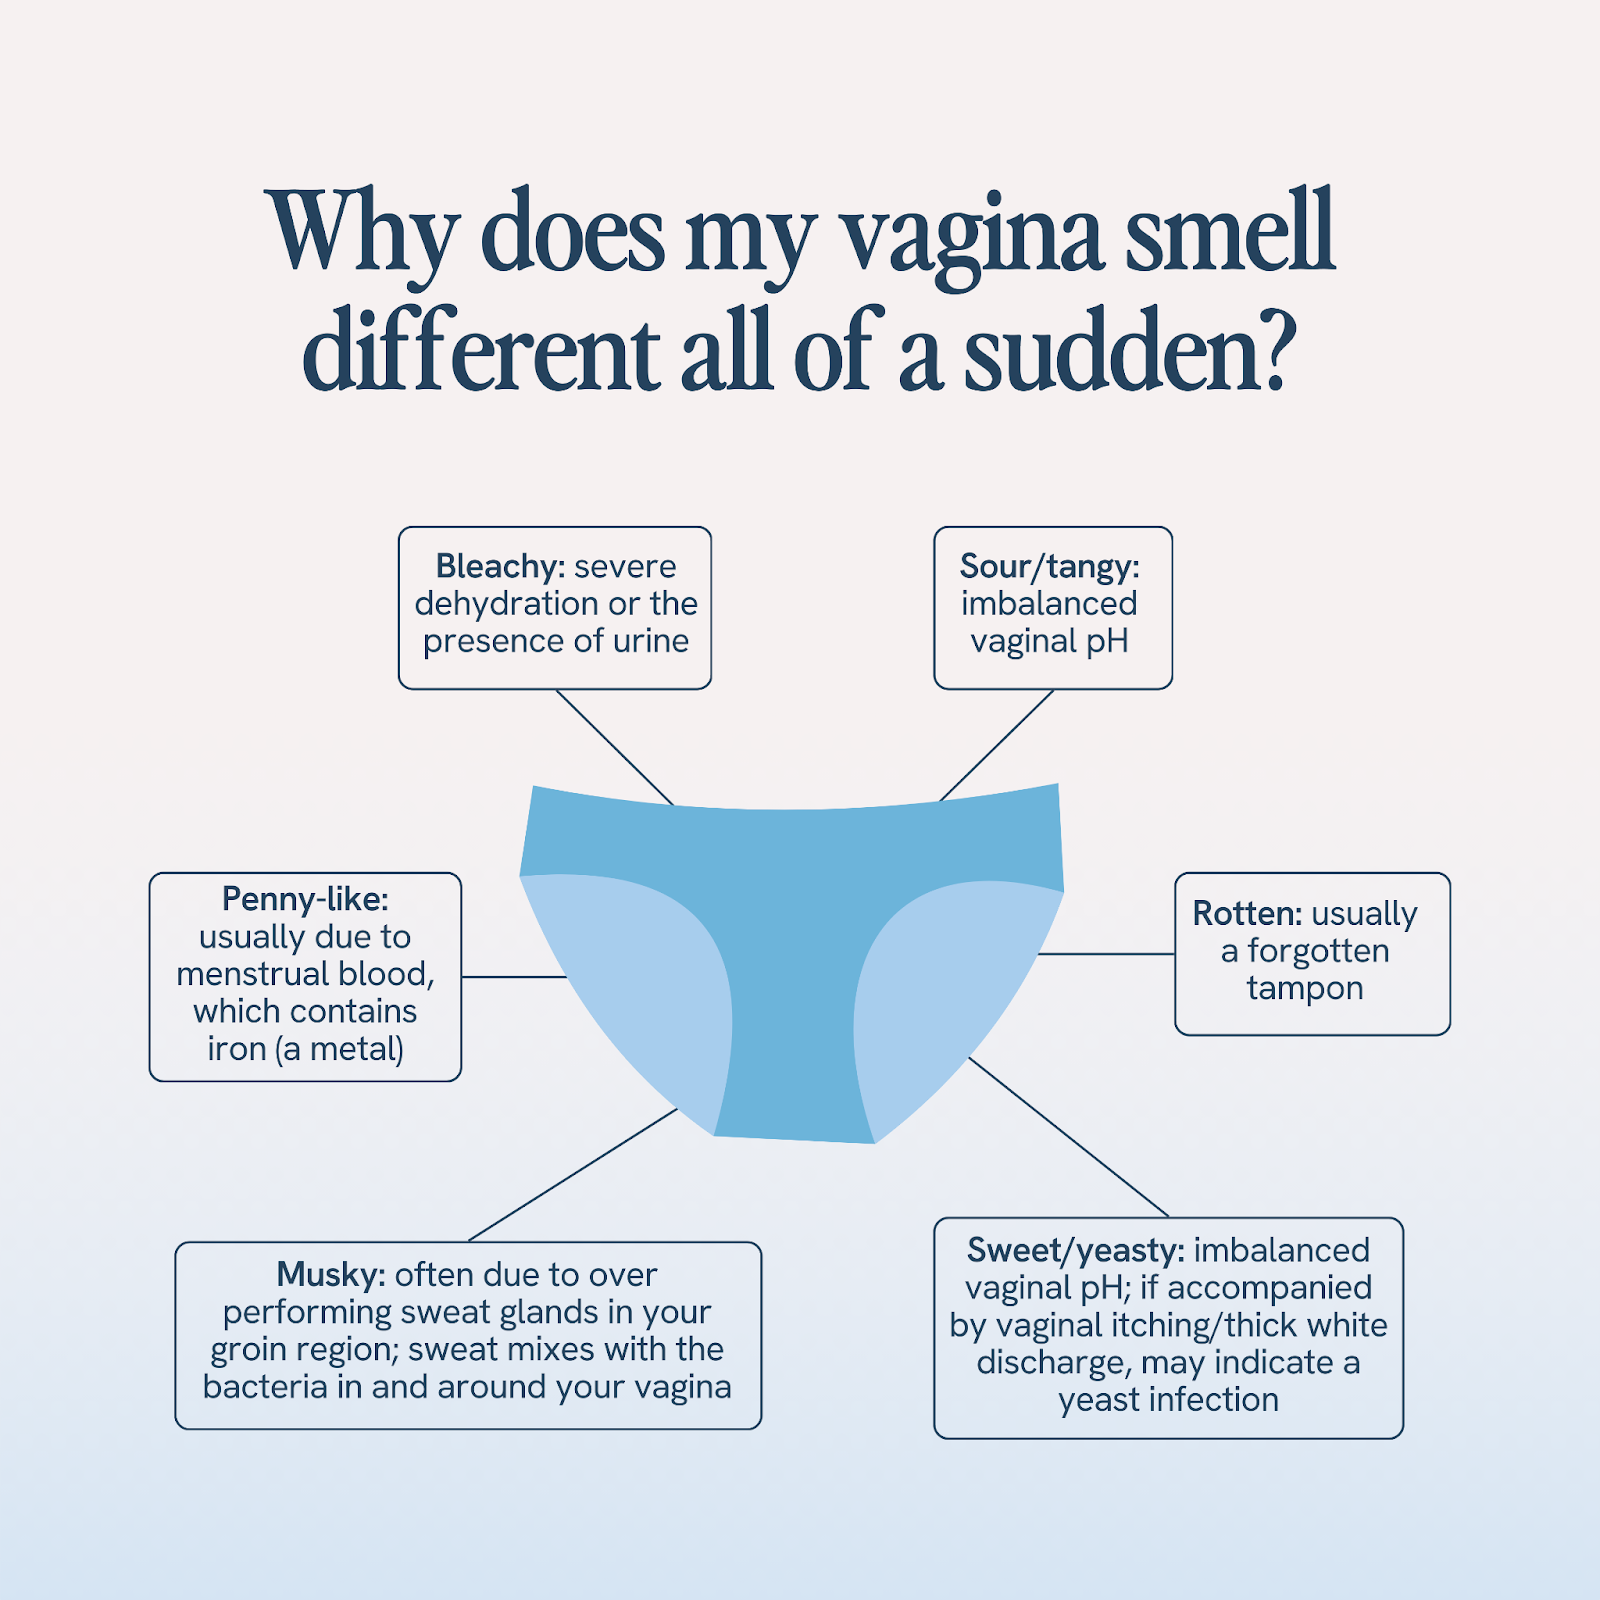 An informative diagram with the question 'Why does my vagina smell different all of a sudden?' Six text boxes with brief explanations surround a central image of blue underwear: 'Bleachy' due to dehydration or urine, 'Sour/tangy' from pH imbalance, 'Rotten' indicating a forgotten tampon, 'Sweet/yeasty' suggesting a yeast infection, 'Musky' from sweat, and 'Penny-like' due to menstrual blood